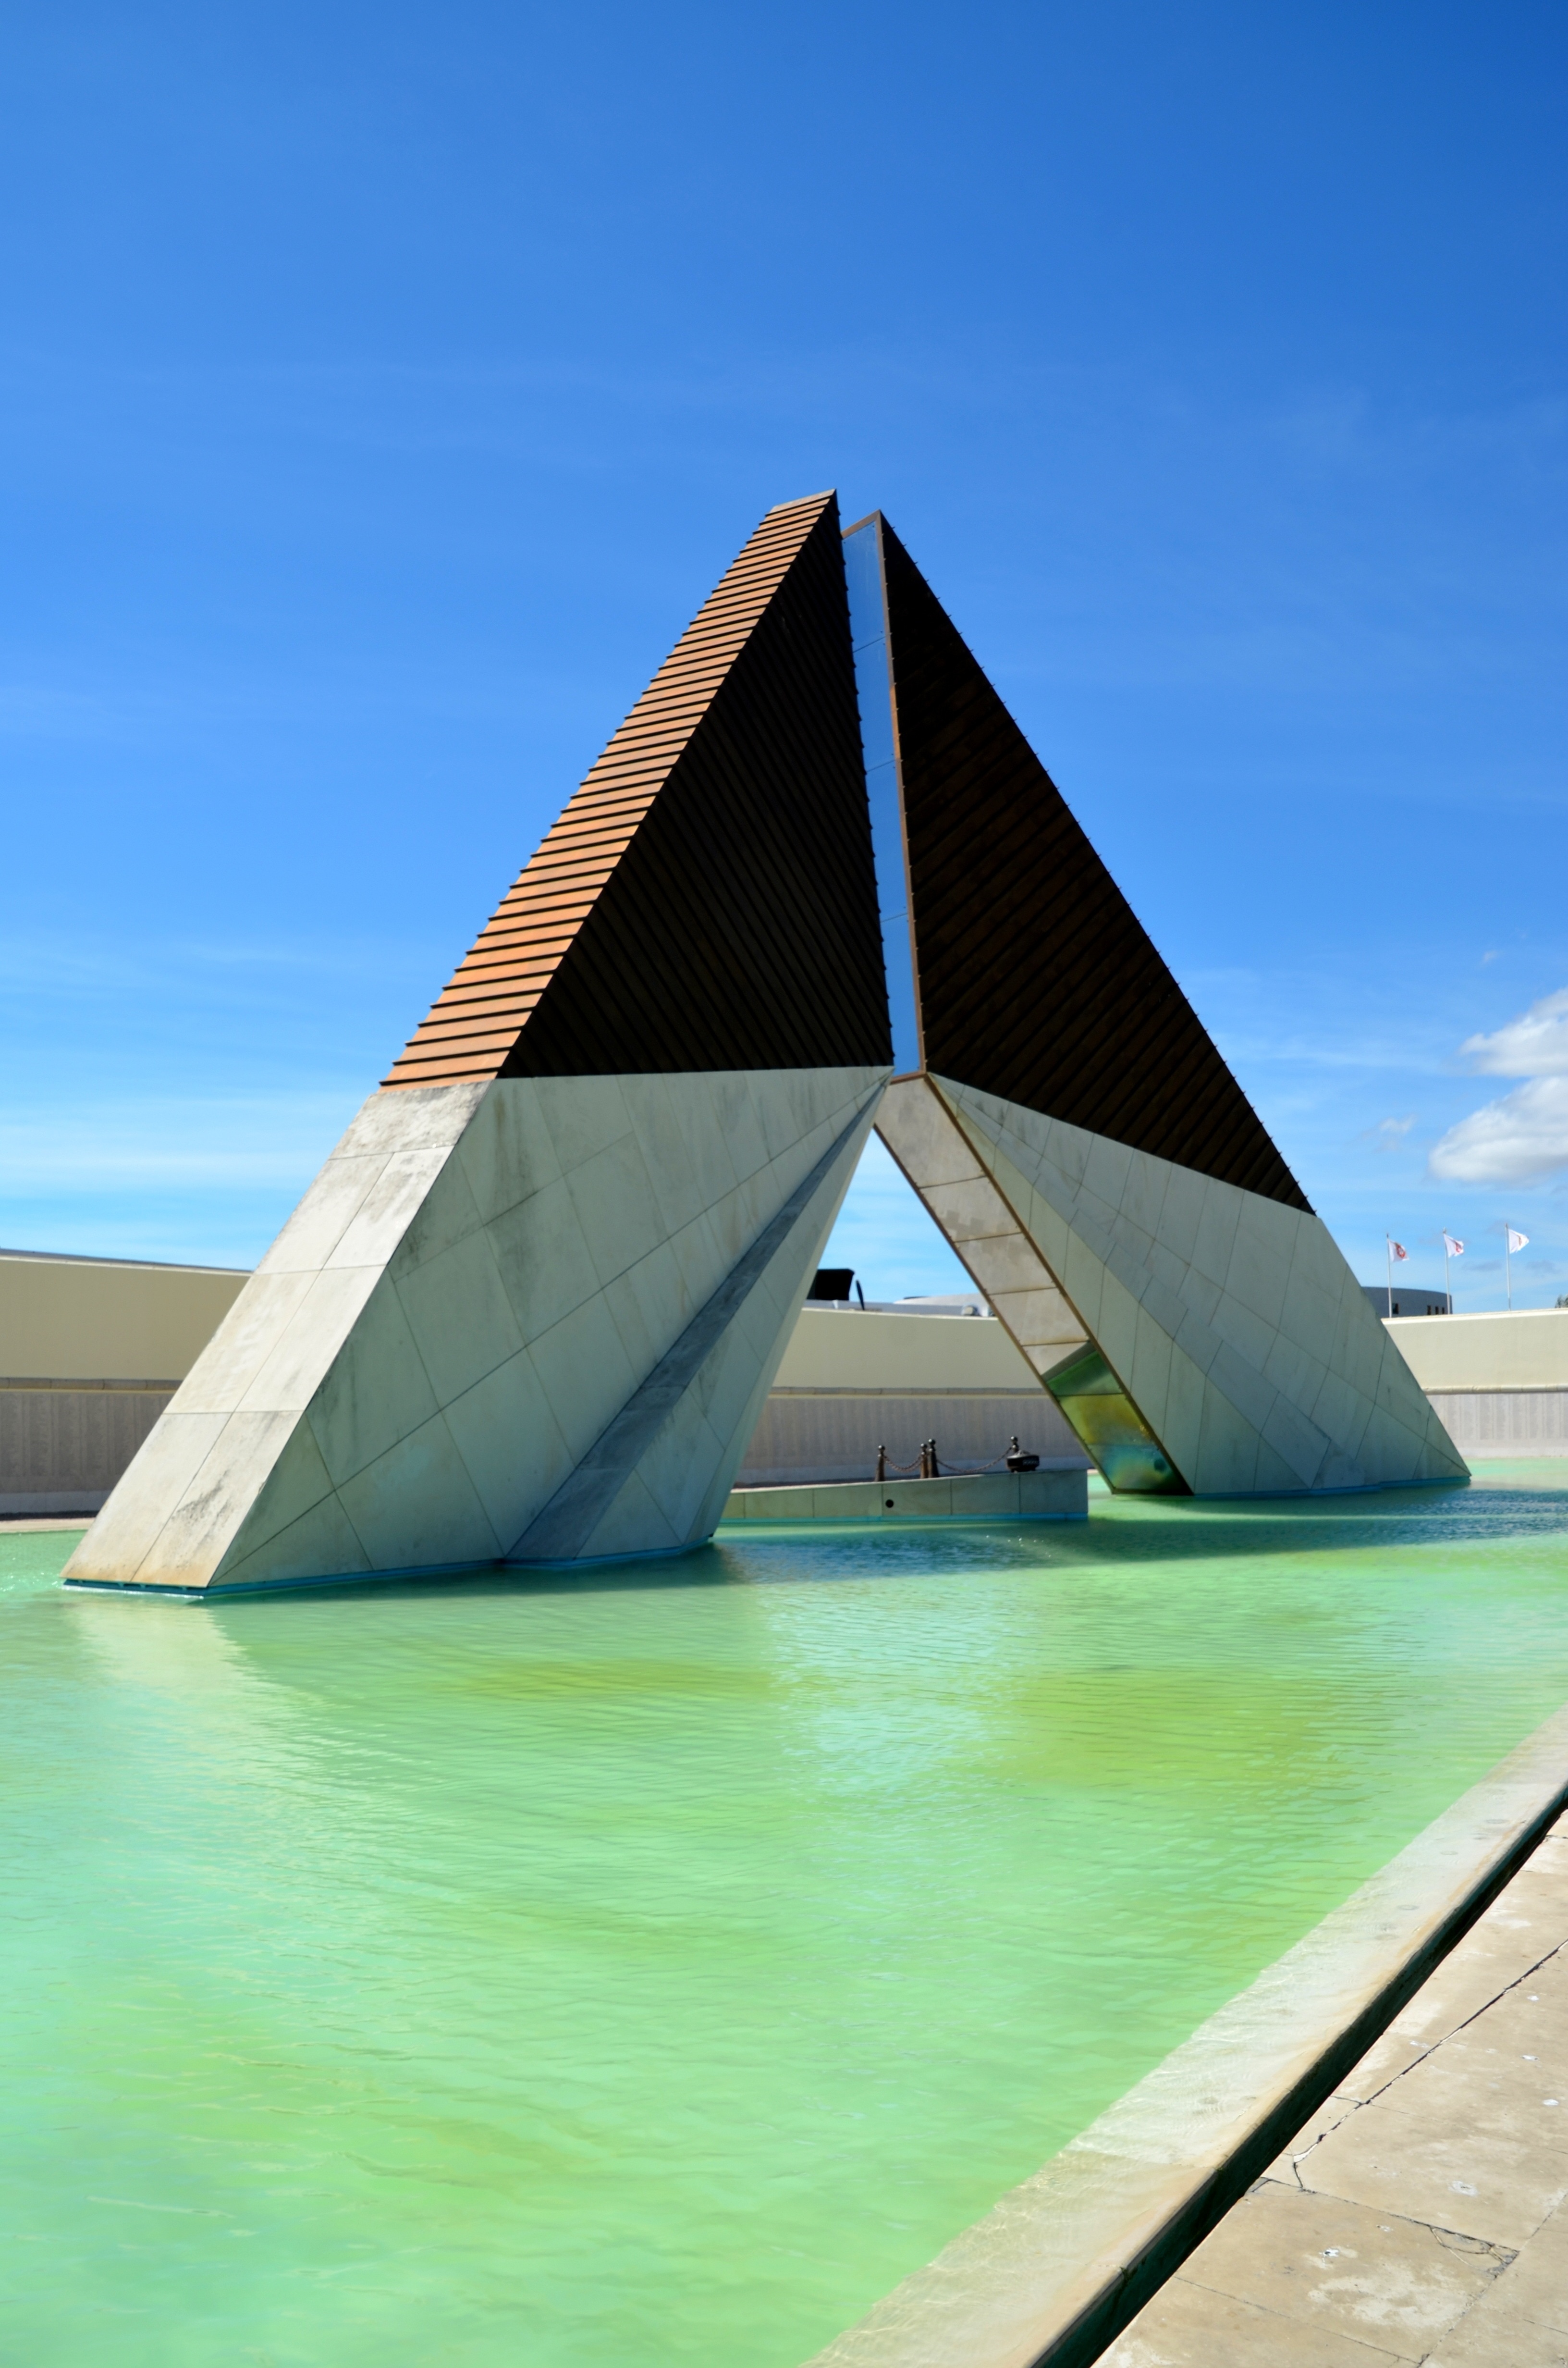 gray and brown concrete triangular shape building